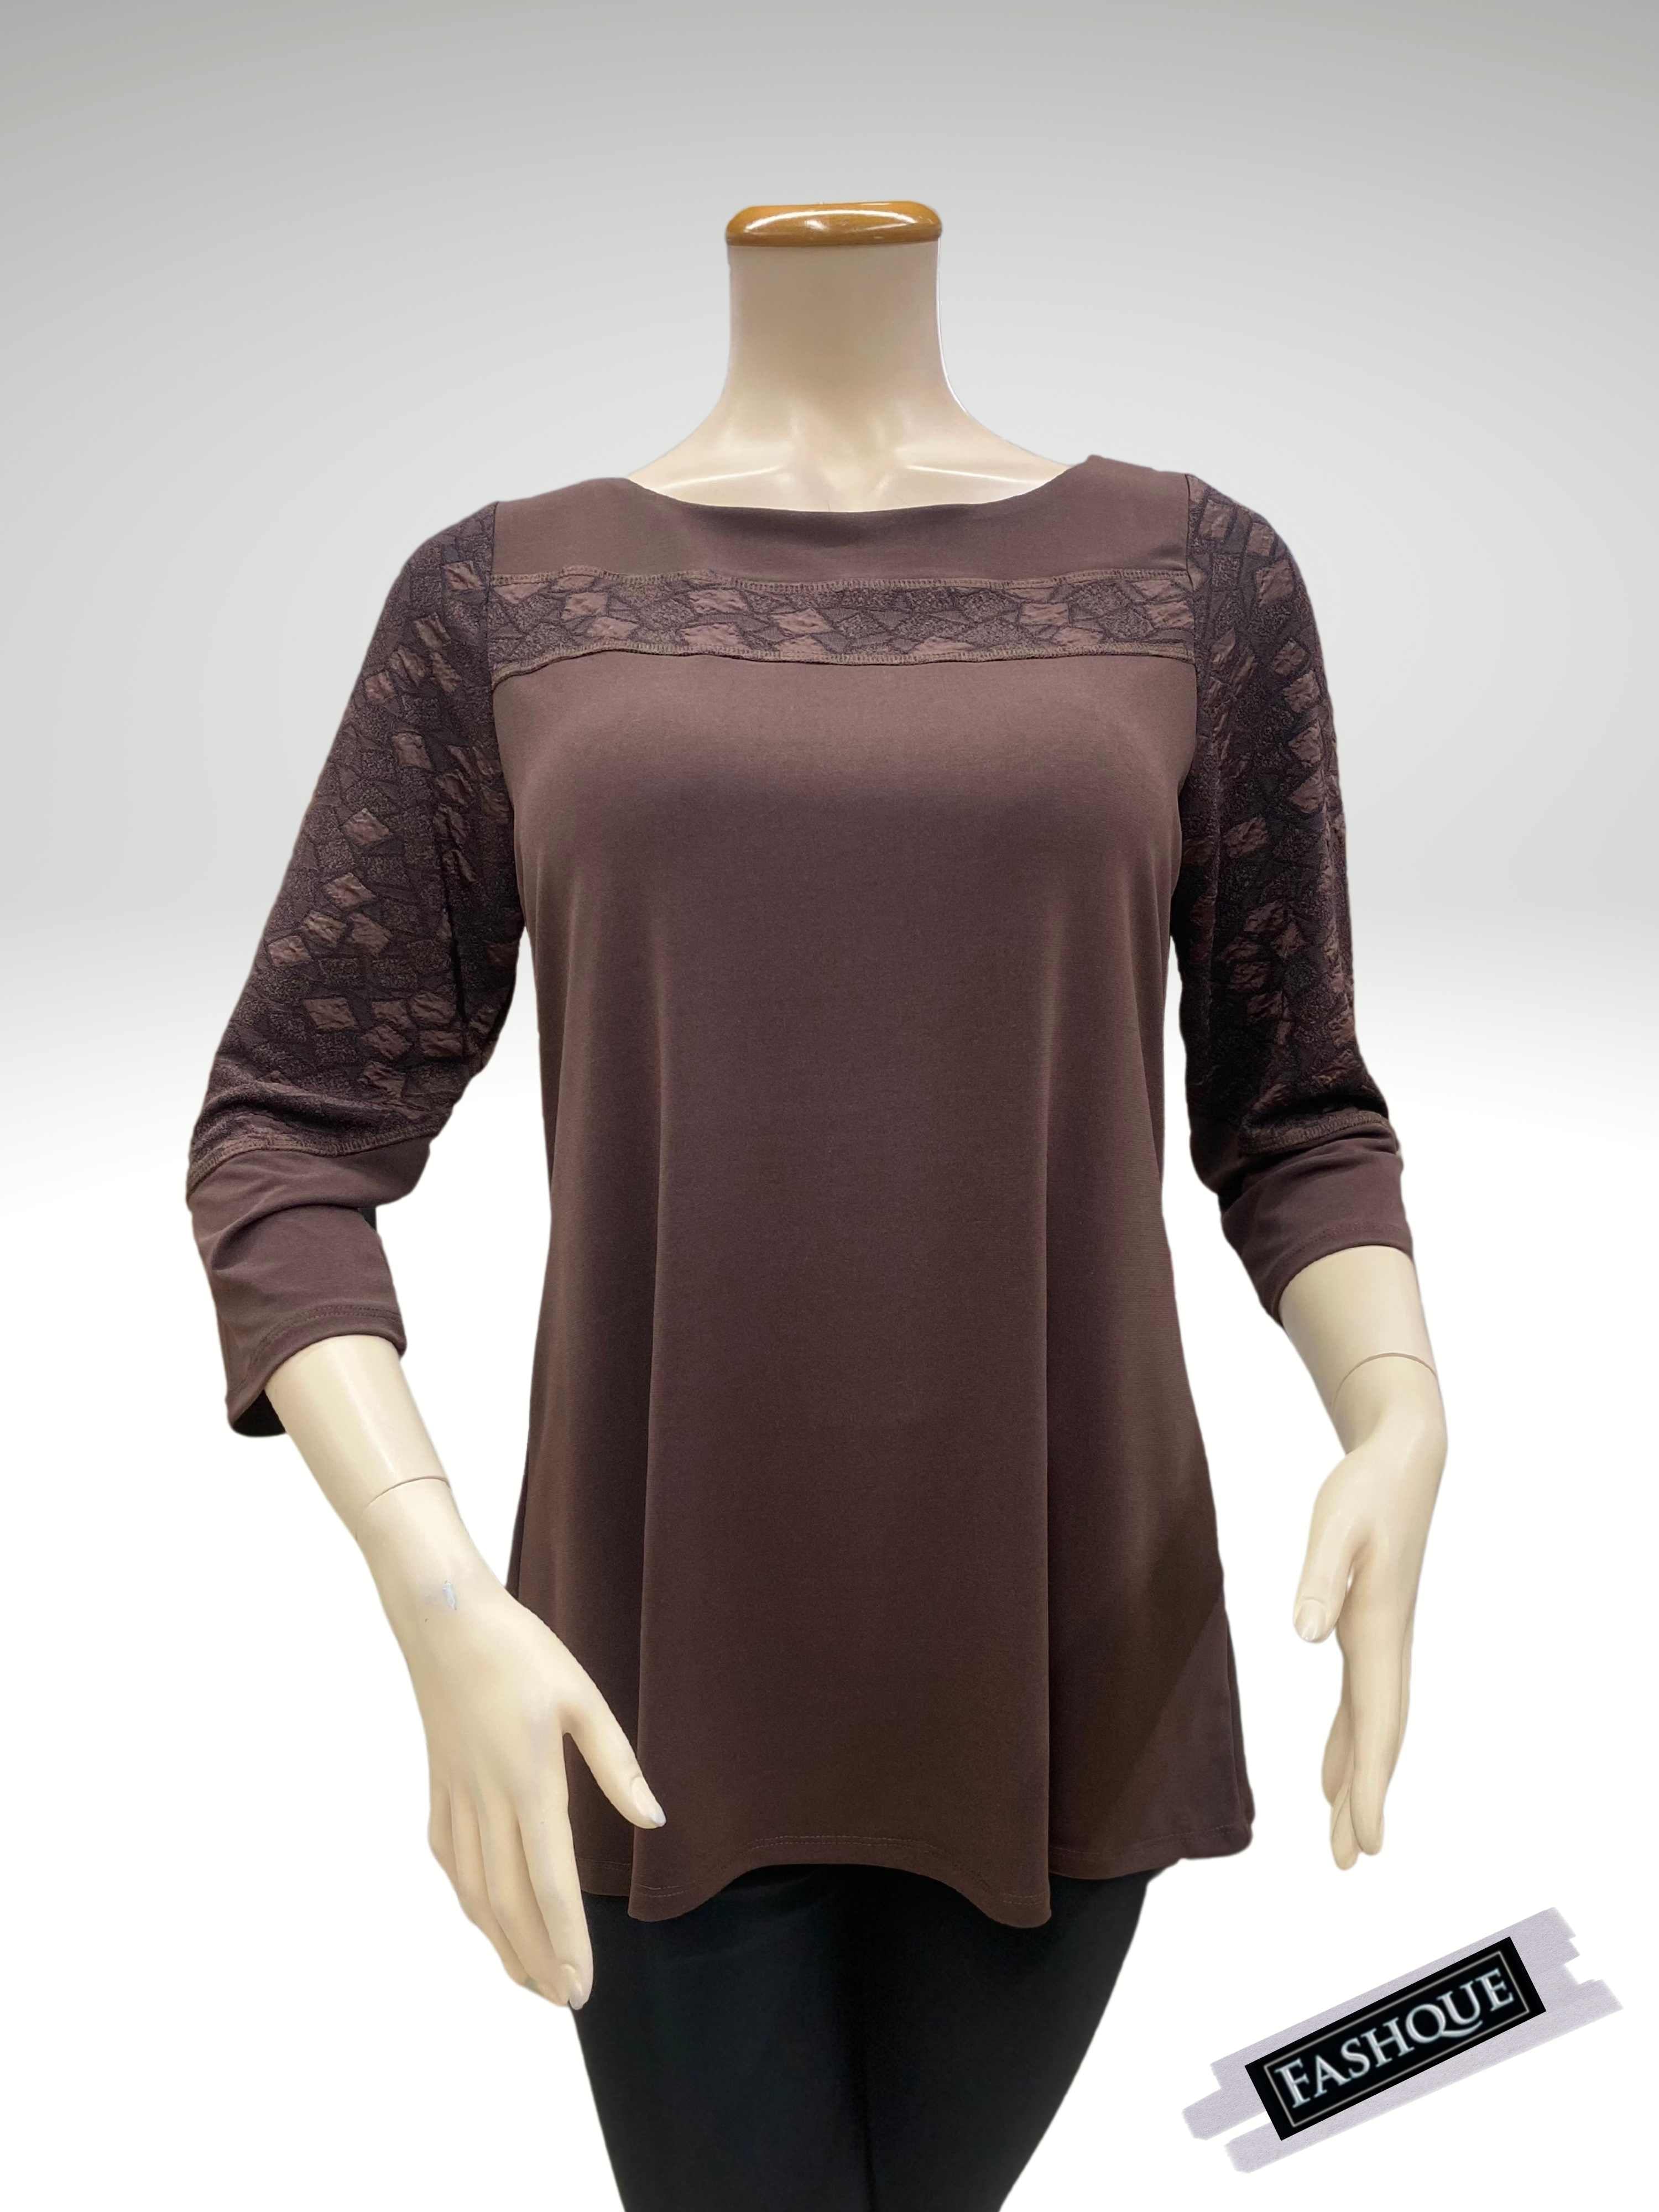 FASHQUE - Scoop Neck Color Block Combo 3/4 Sleeve Tunic - T561 SALE